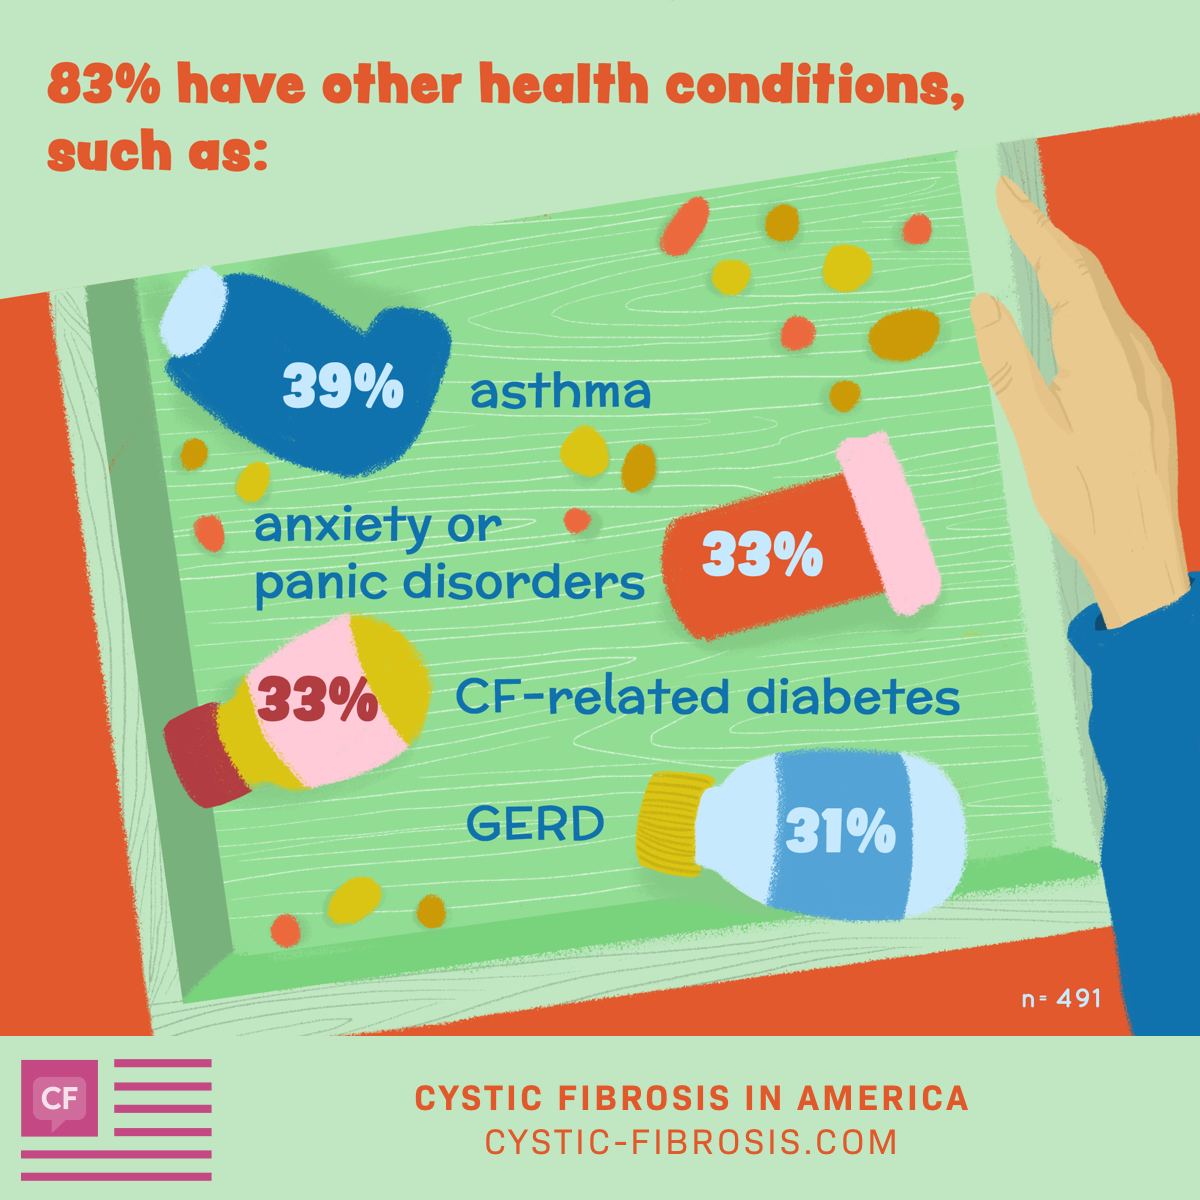  83% of respondents have other health conditions, such as: asthma (39%), anxiety or panic disorders (33%), CF-related diabetes (33%), and GERD (31%)